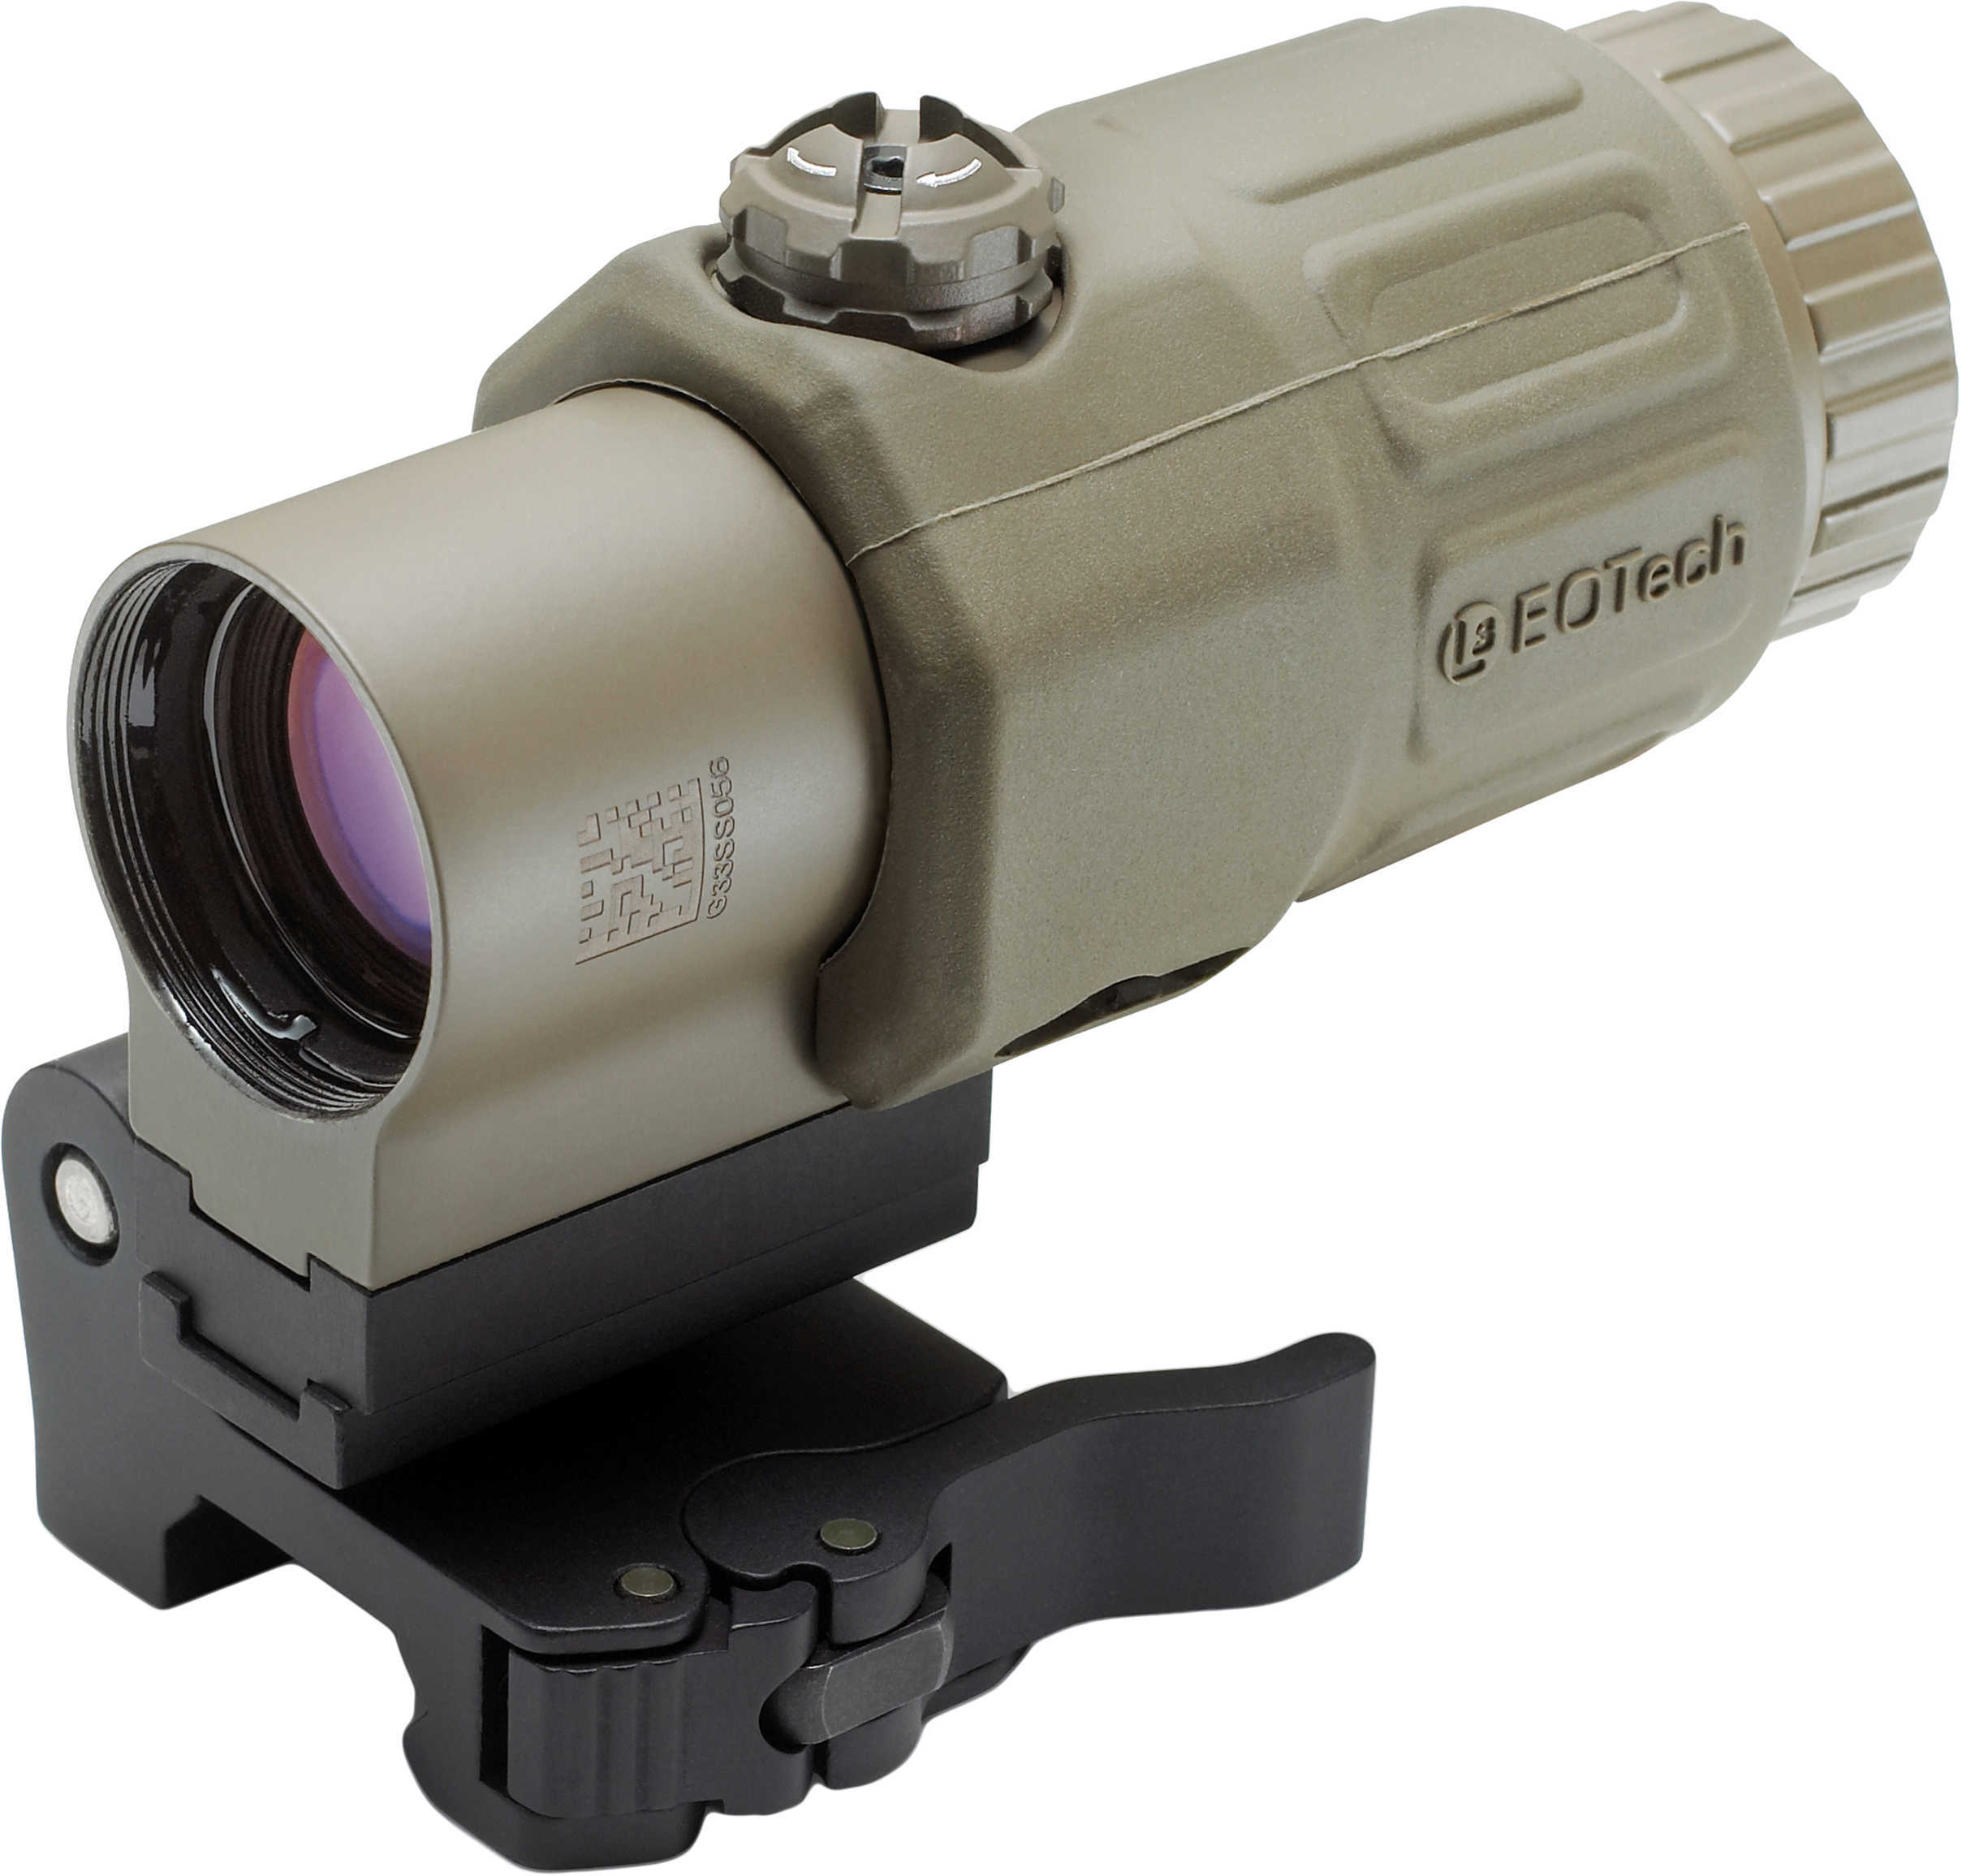 EoTech G33 3x Magnifier with Quick Disconnect Tan STS Mount Model: G33.STS TAN